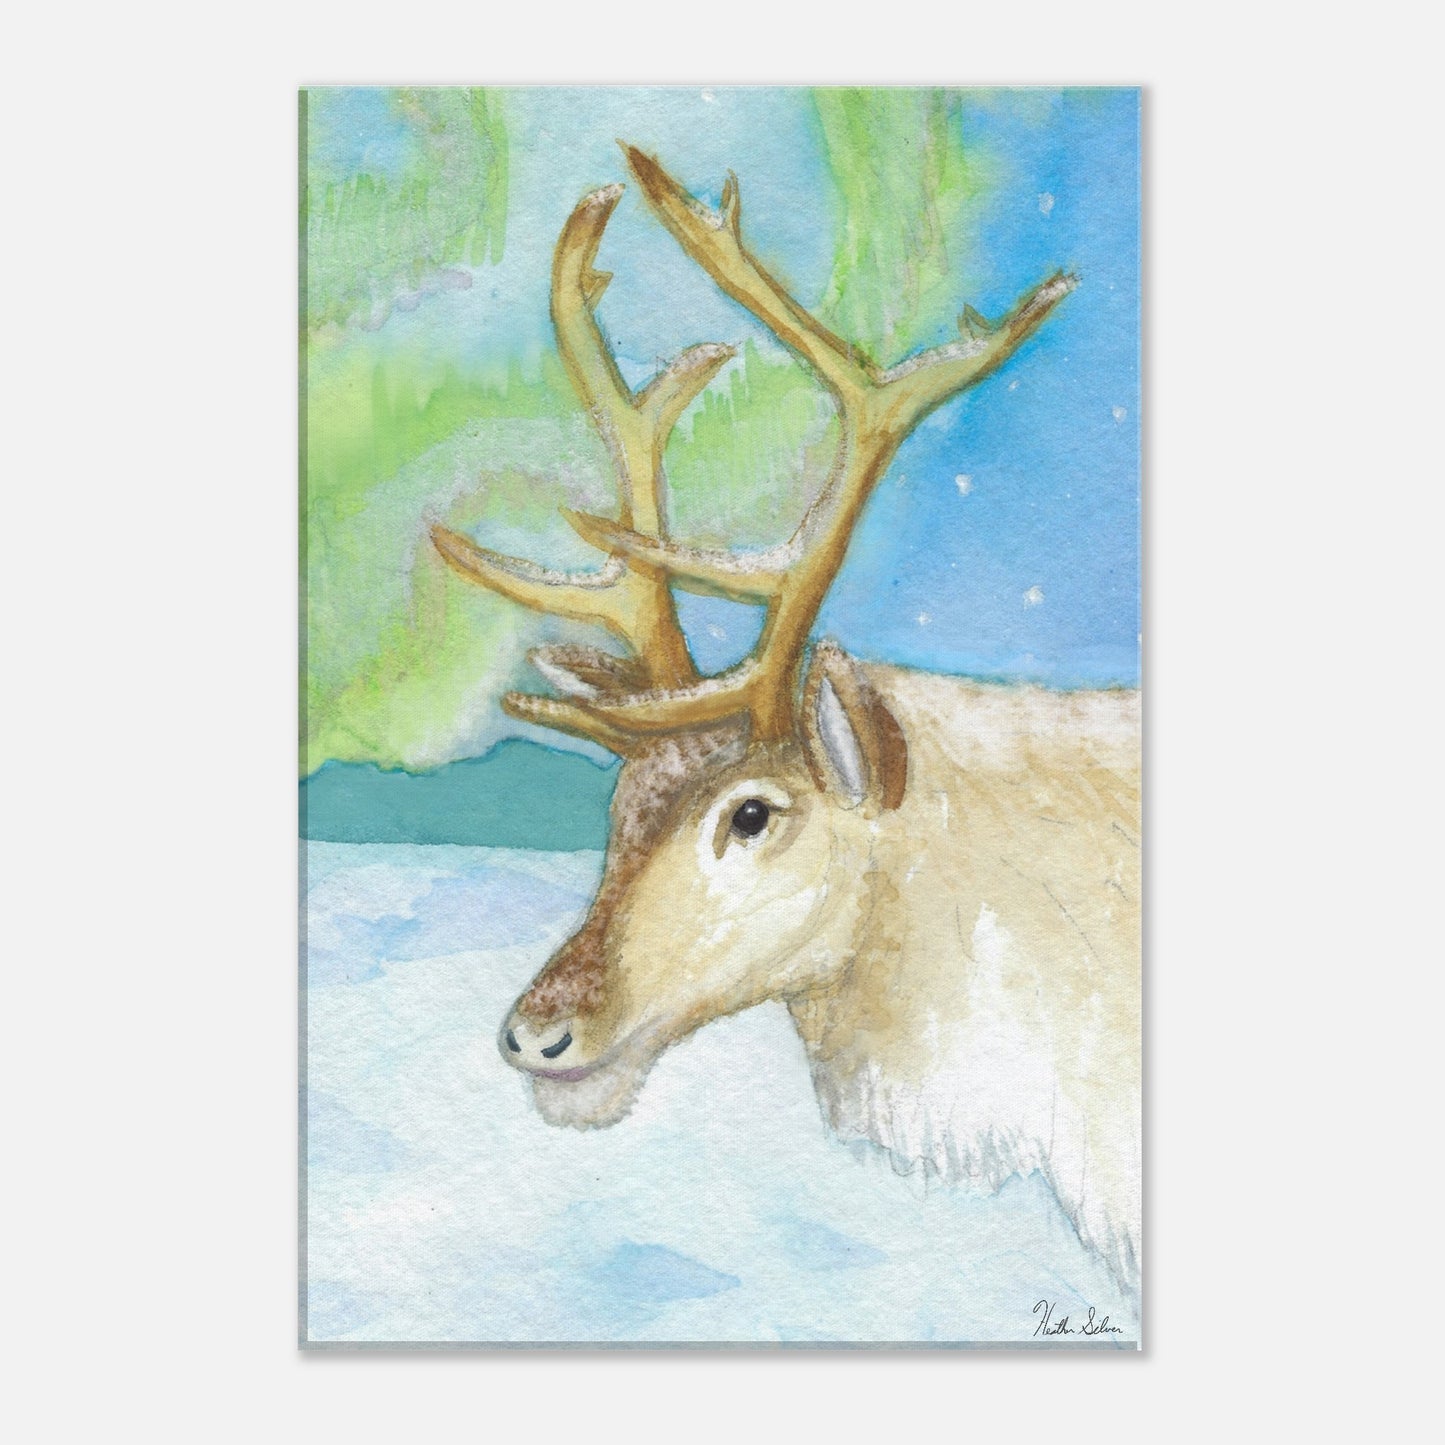 8 by 12 inch slim canvas print of Heather Silver's watercolor painting, northern lights reindeer.